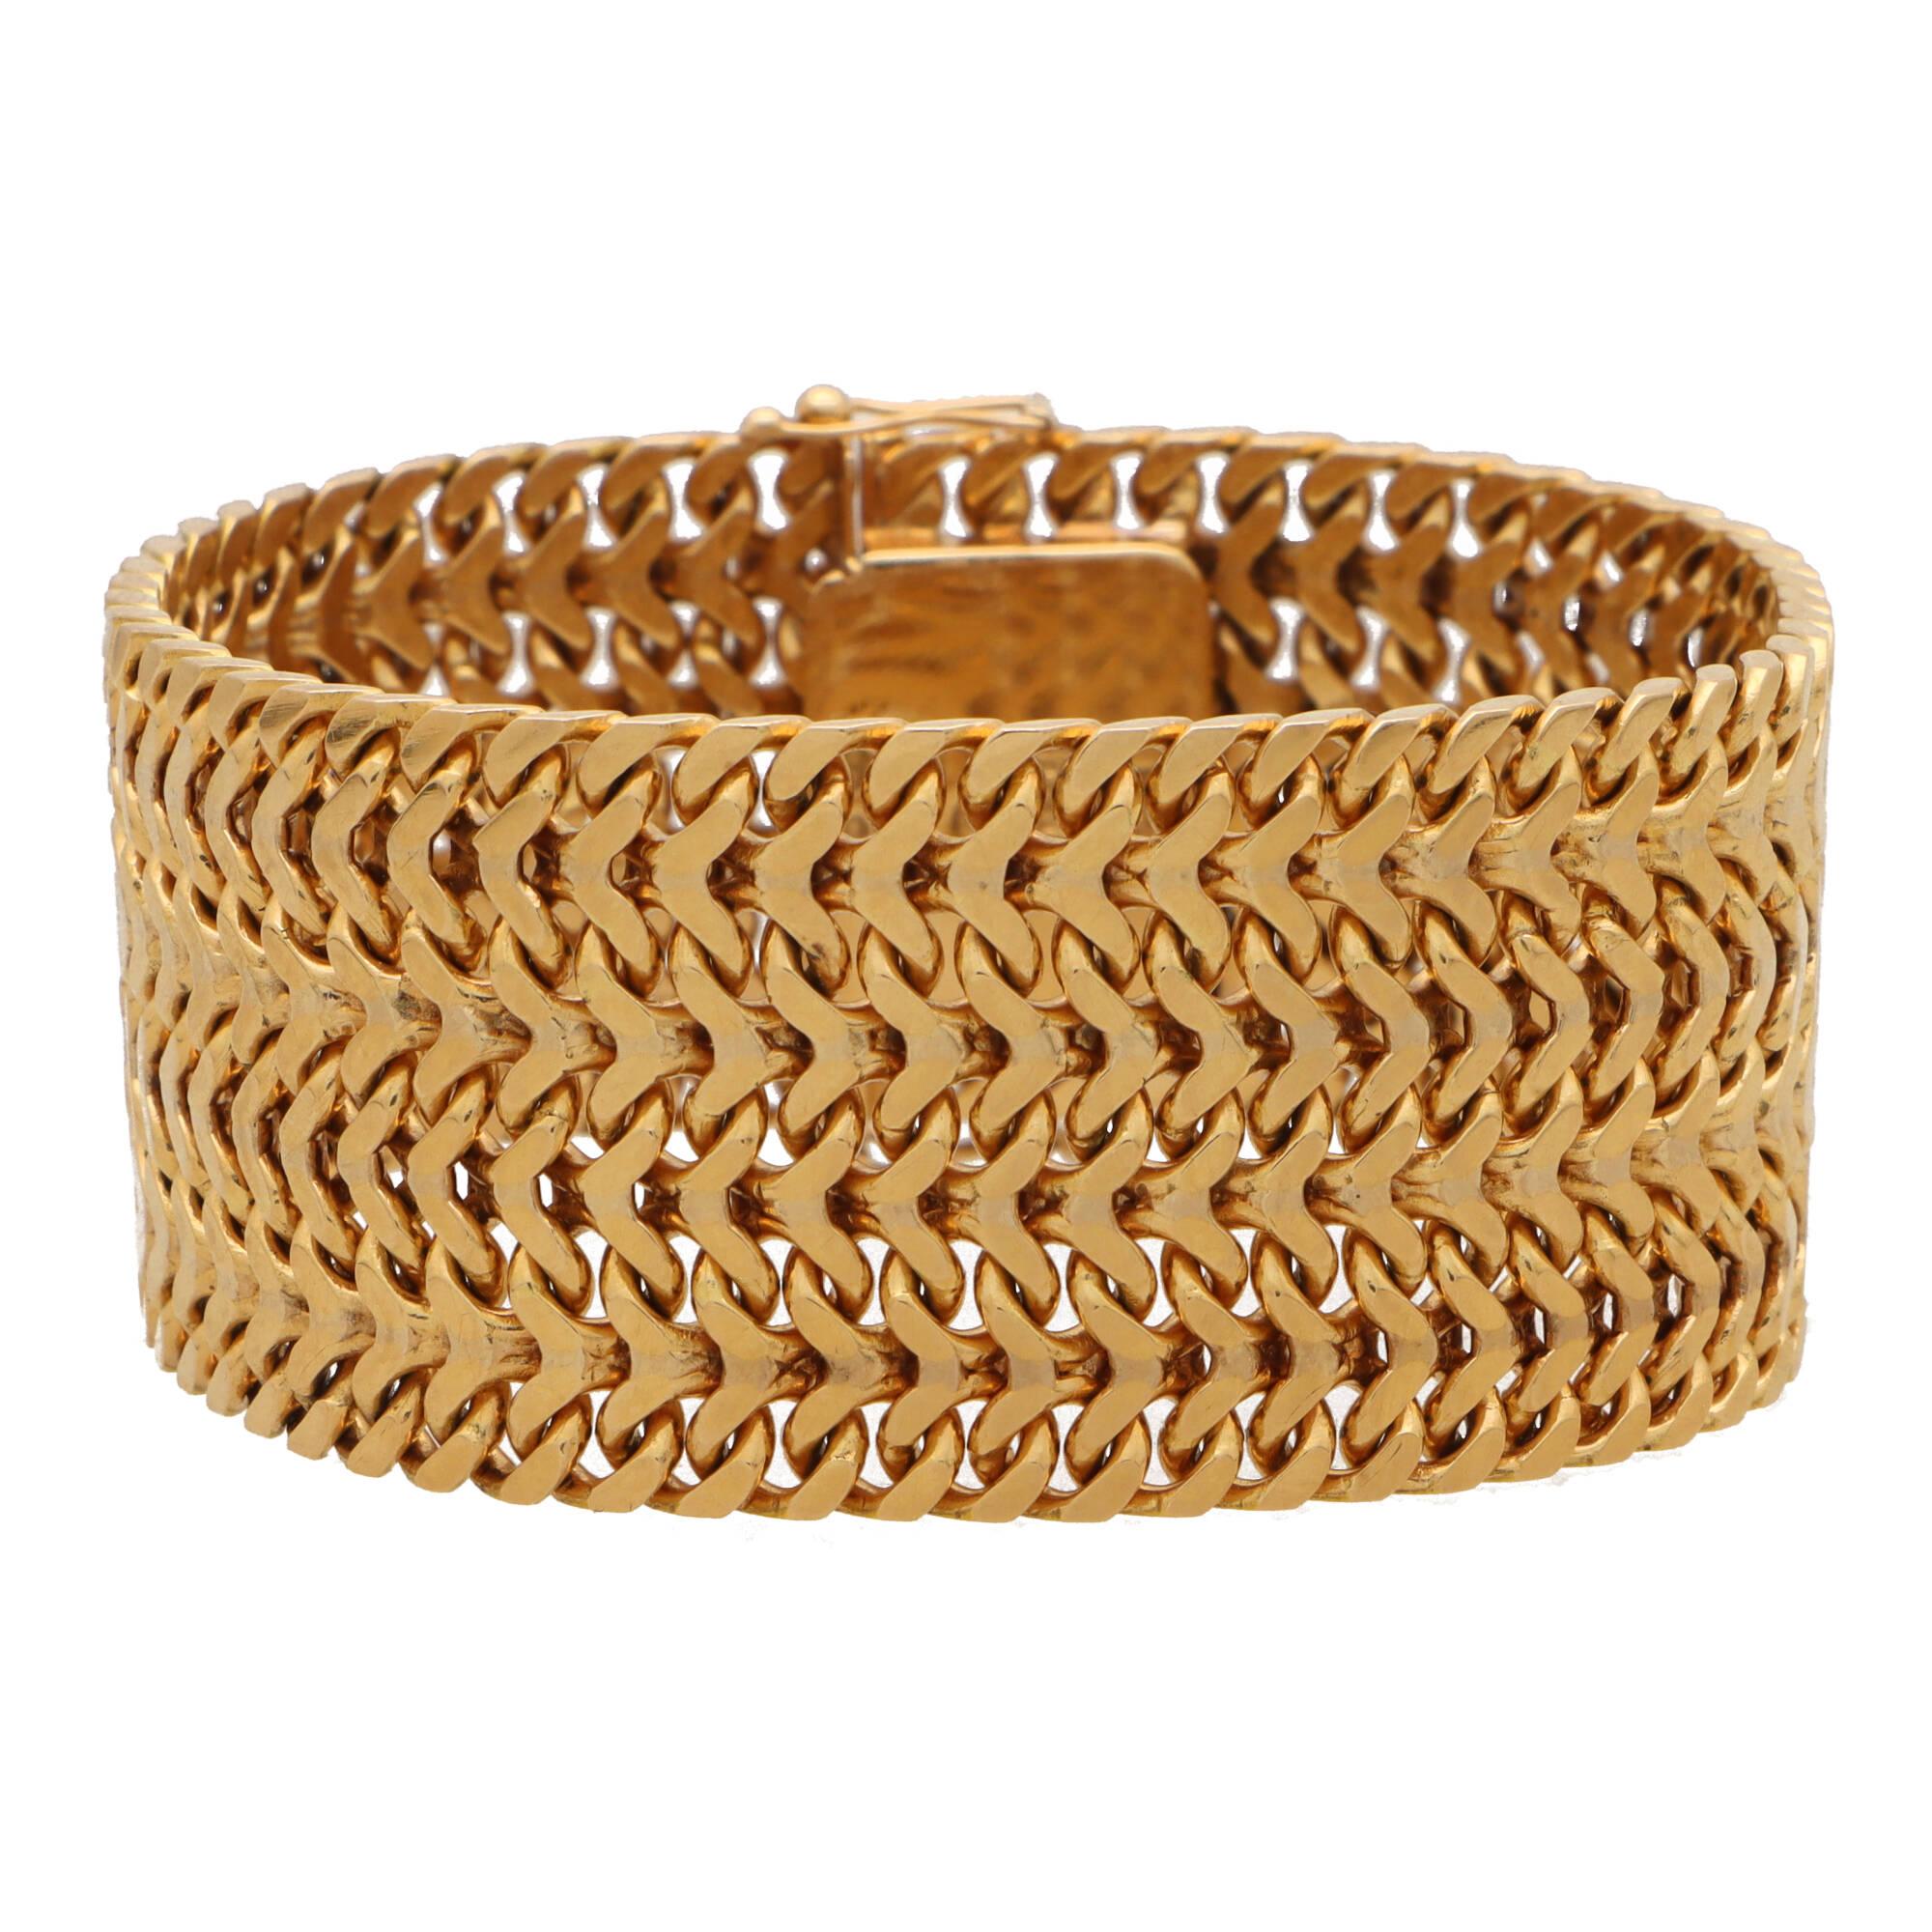 A beautiful vintage heavy weight mesh bracelet set in 18k rose gold.

The bracelet is composed of a heavy weight mesh and is secured with a tongue push clasp and an additional two safety catches! The links within the mesh are designed with a